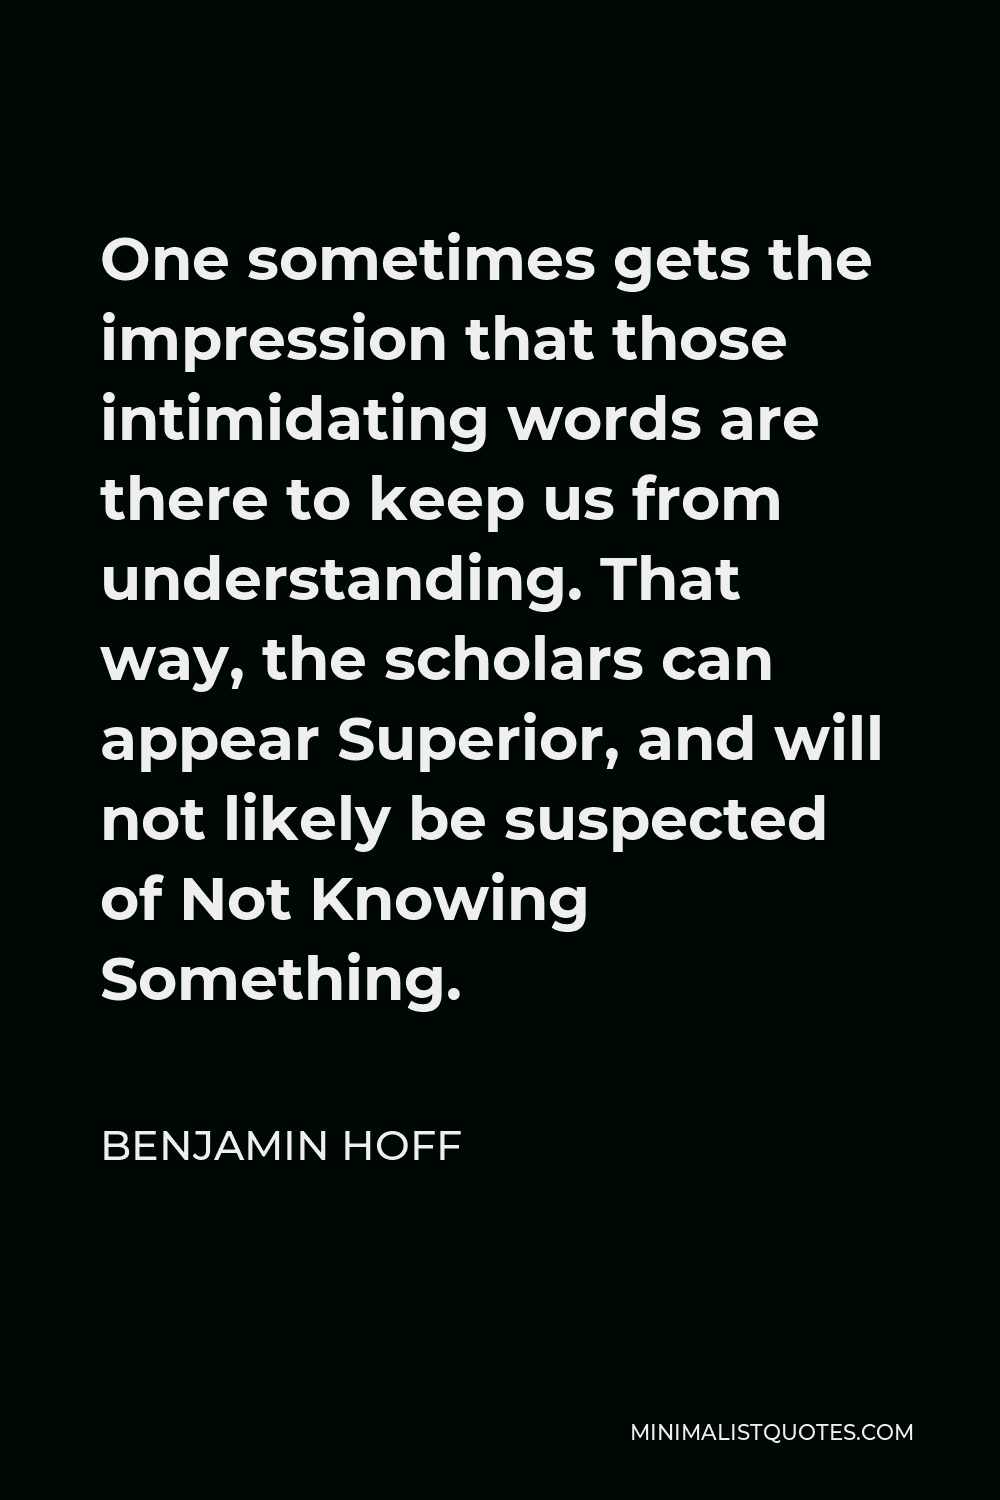 Benjamin Hoff Quote - One sometimes gets the impression that those intimidating words are there to keep us from understanding. That way, the scholars can appear Superior, and will not likely be suspected of Not Knowing Something.